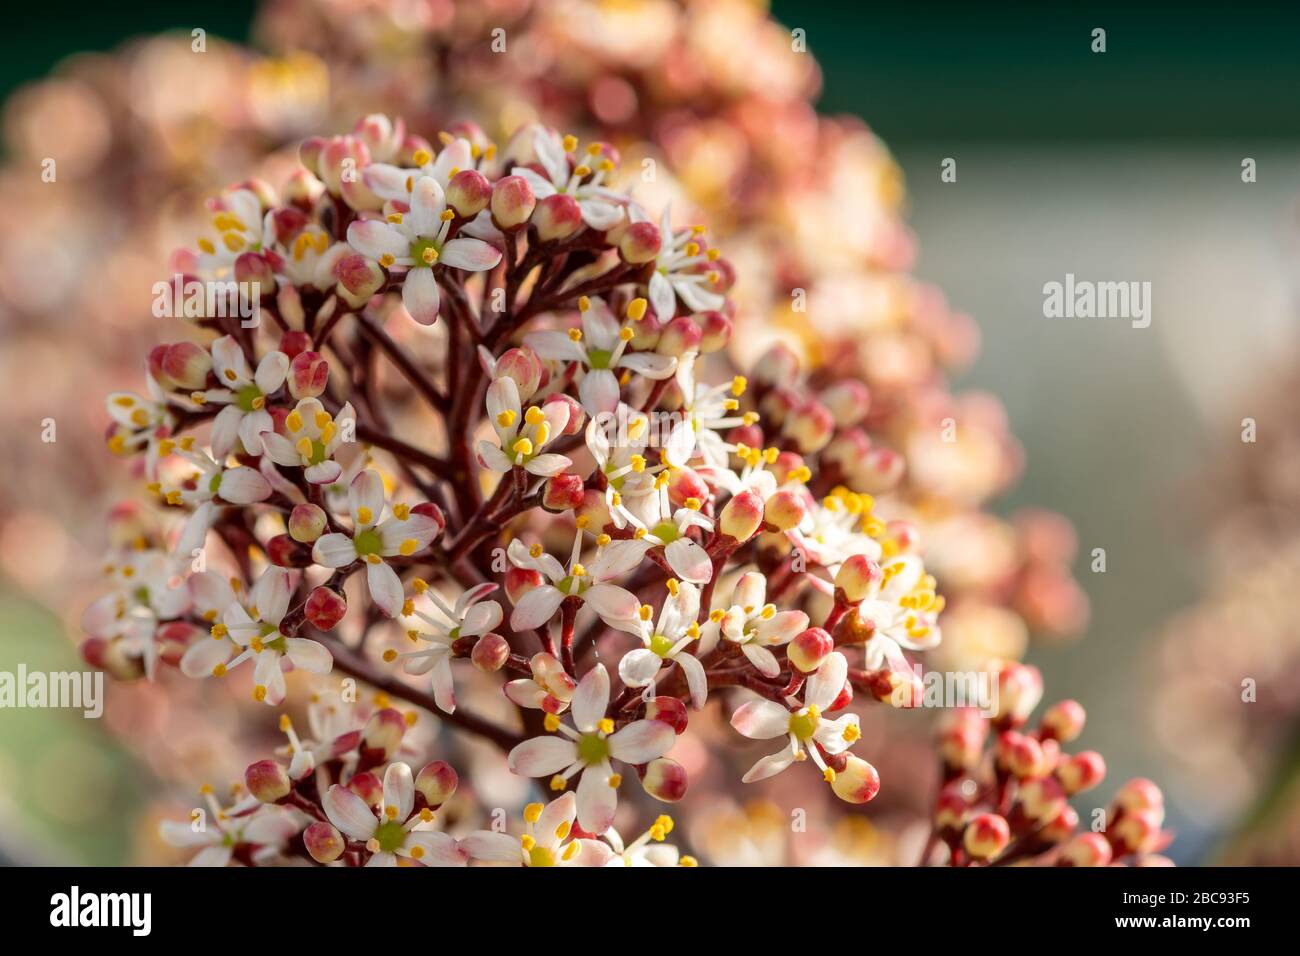 Close up of Japanese skimmia (skimmia japonica) flowers in bloom Stock Photo